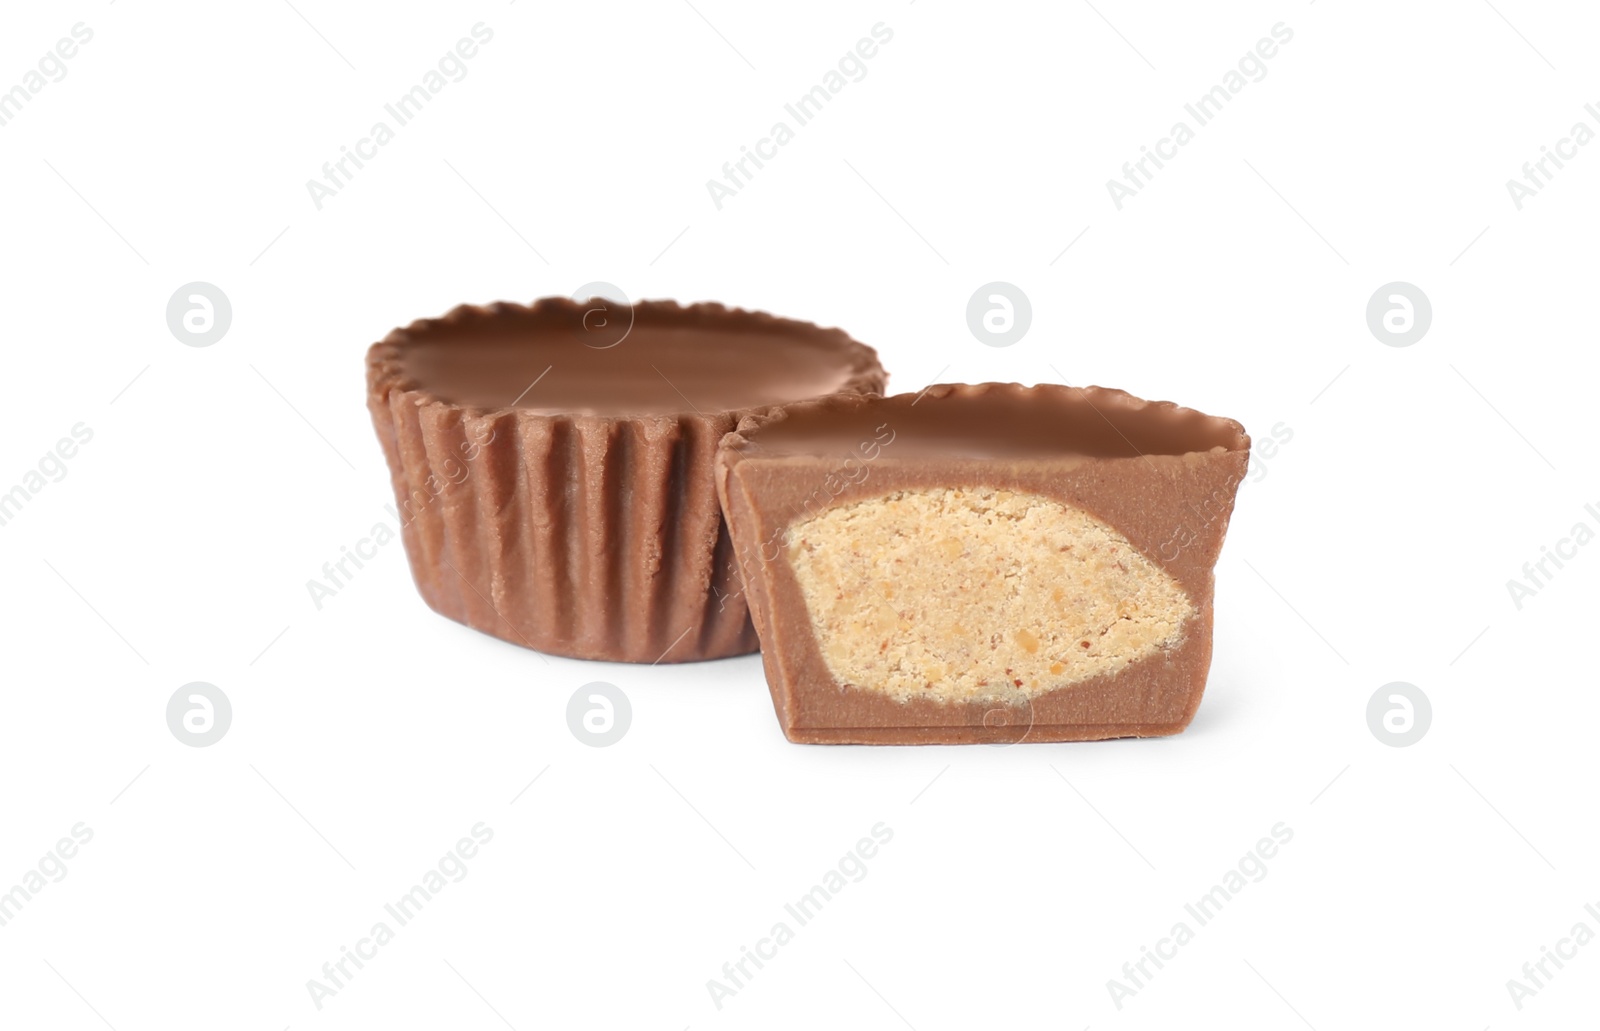 Photo of Cut and whole peanut butter cups isolated on white